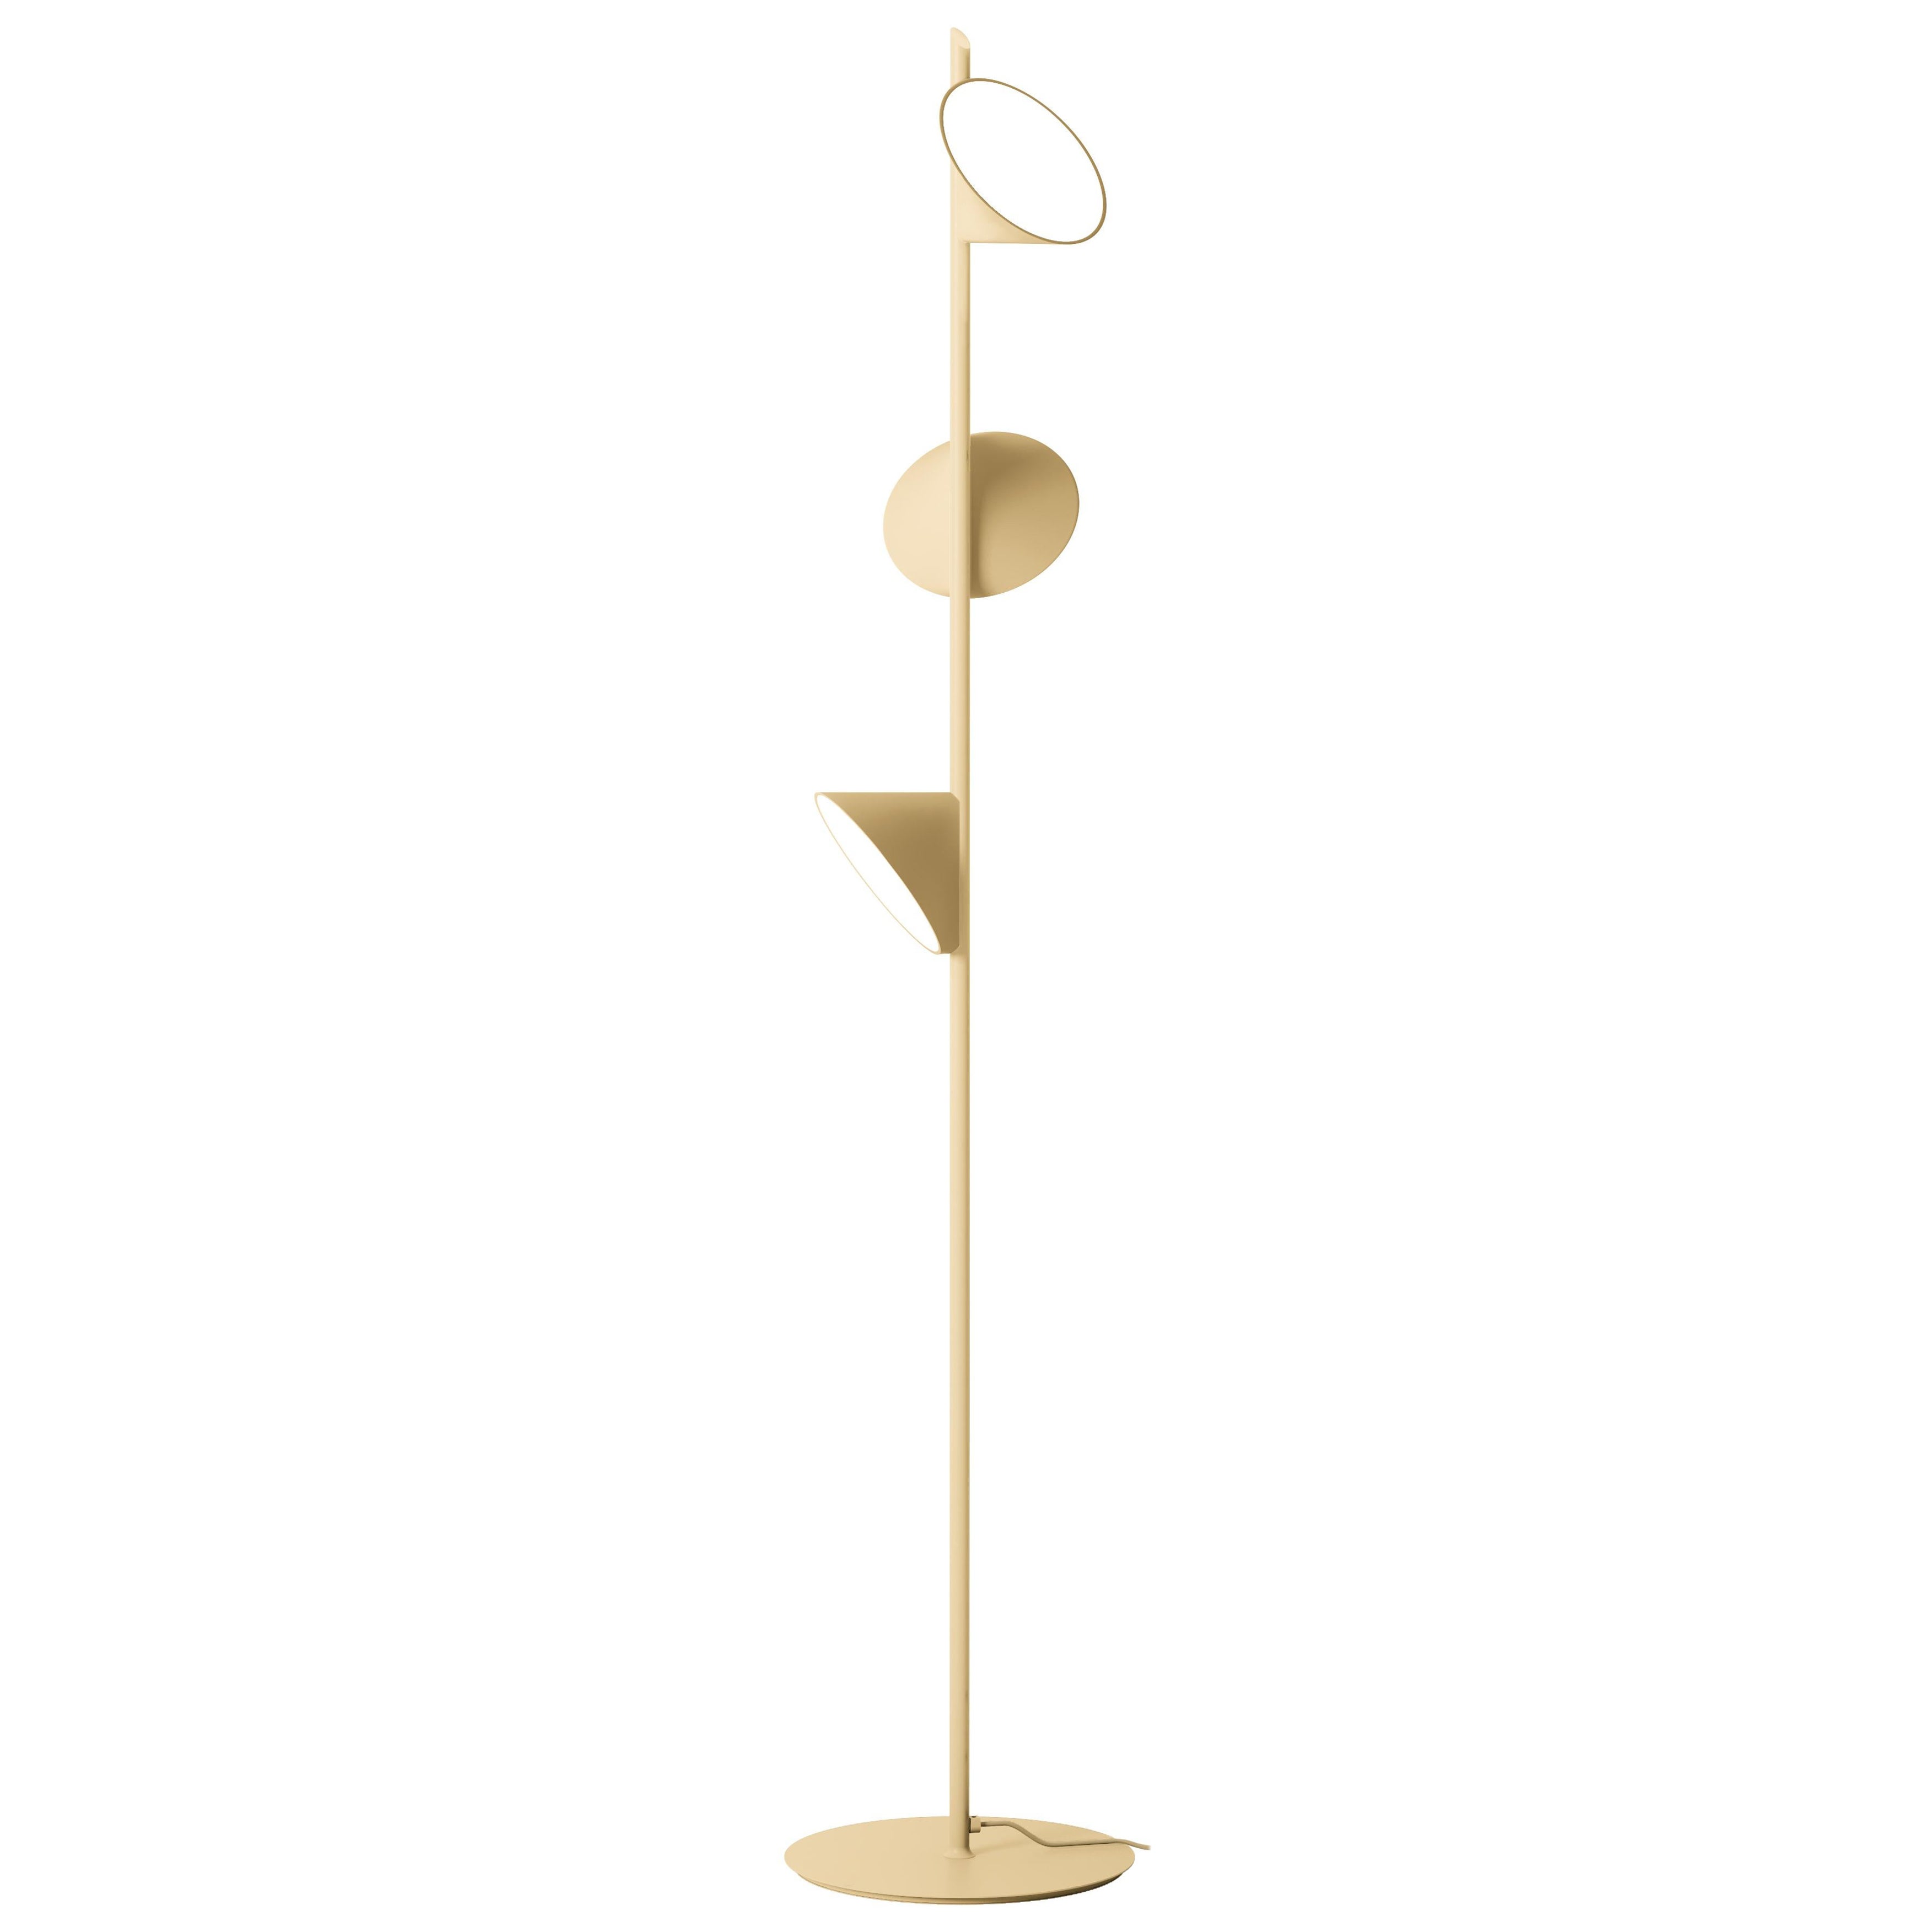 Axolight Orchid Floor Lamp with Aluminum Body in Sand by Rainer Mutsch For Sale